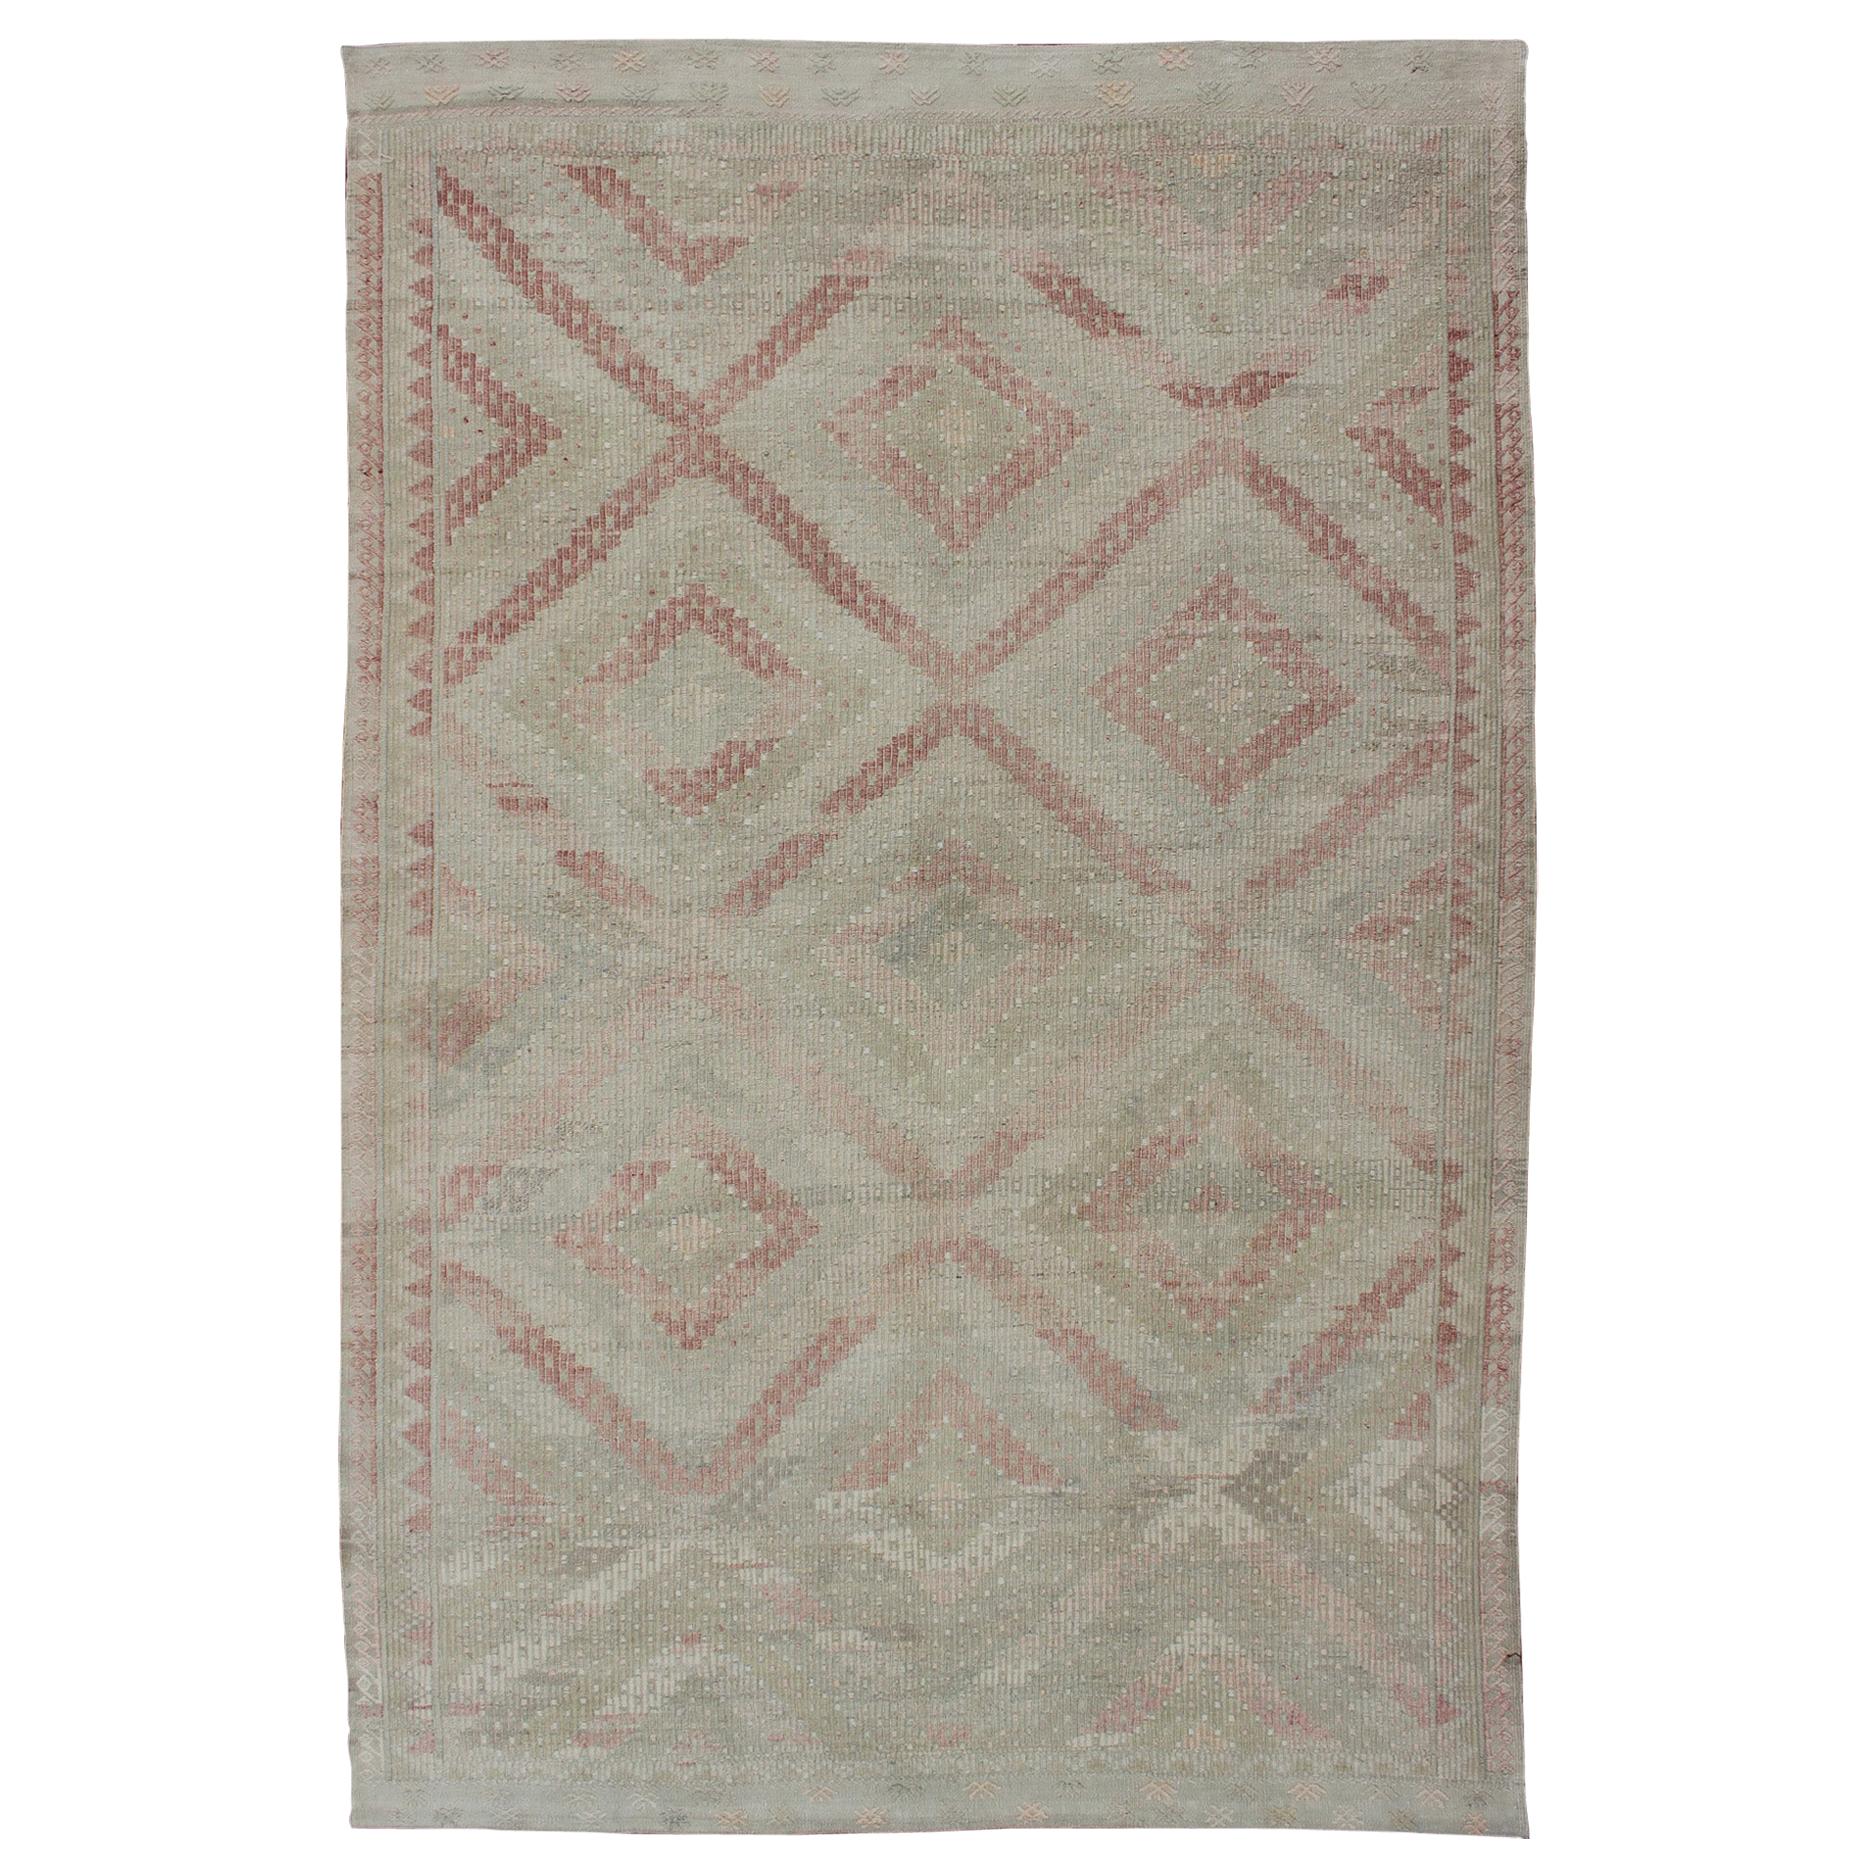 Vintage Turkish Embroidered Rug with Geometric Diamond Design with Soft Colors For Sale